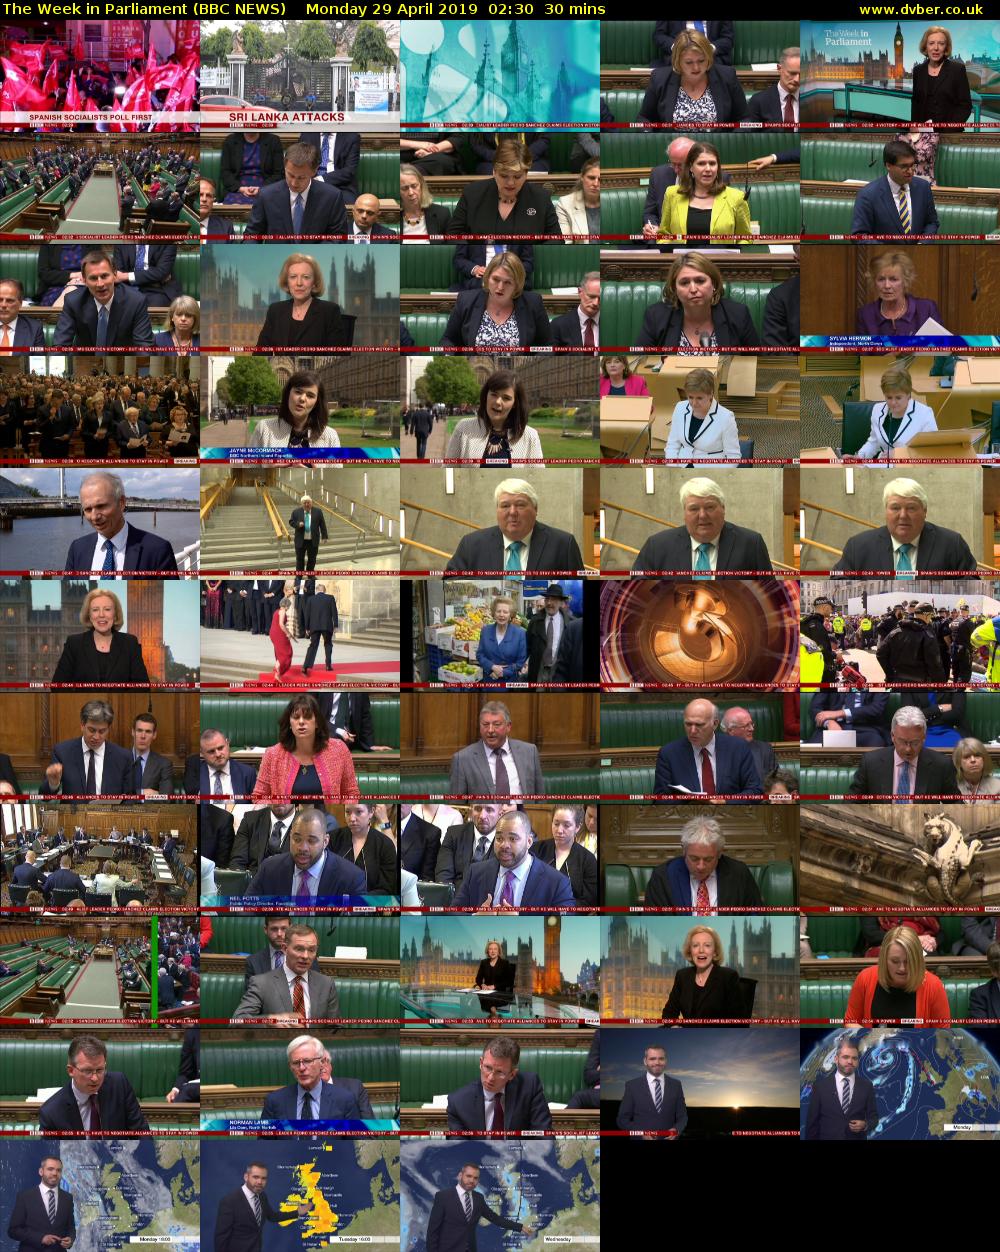 The Week in Parliament (BBC NEWS) Monday 29 April 2019 02:30 - 03:00